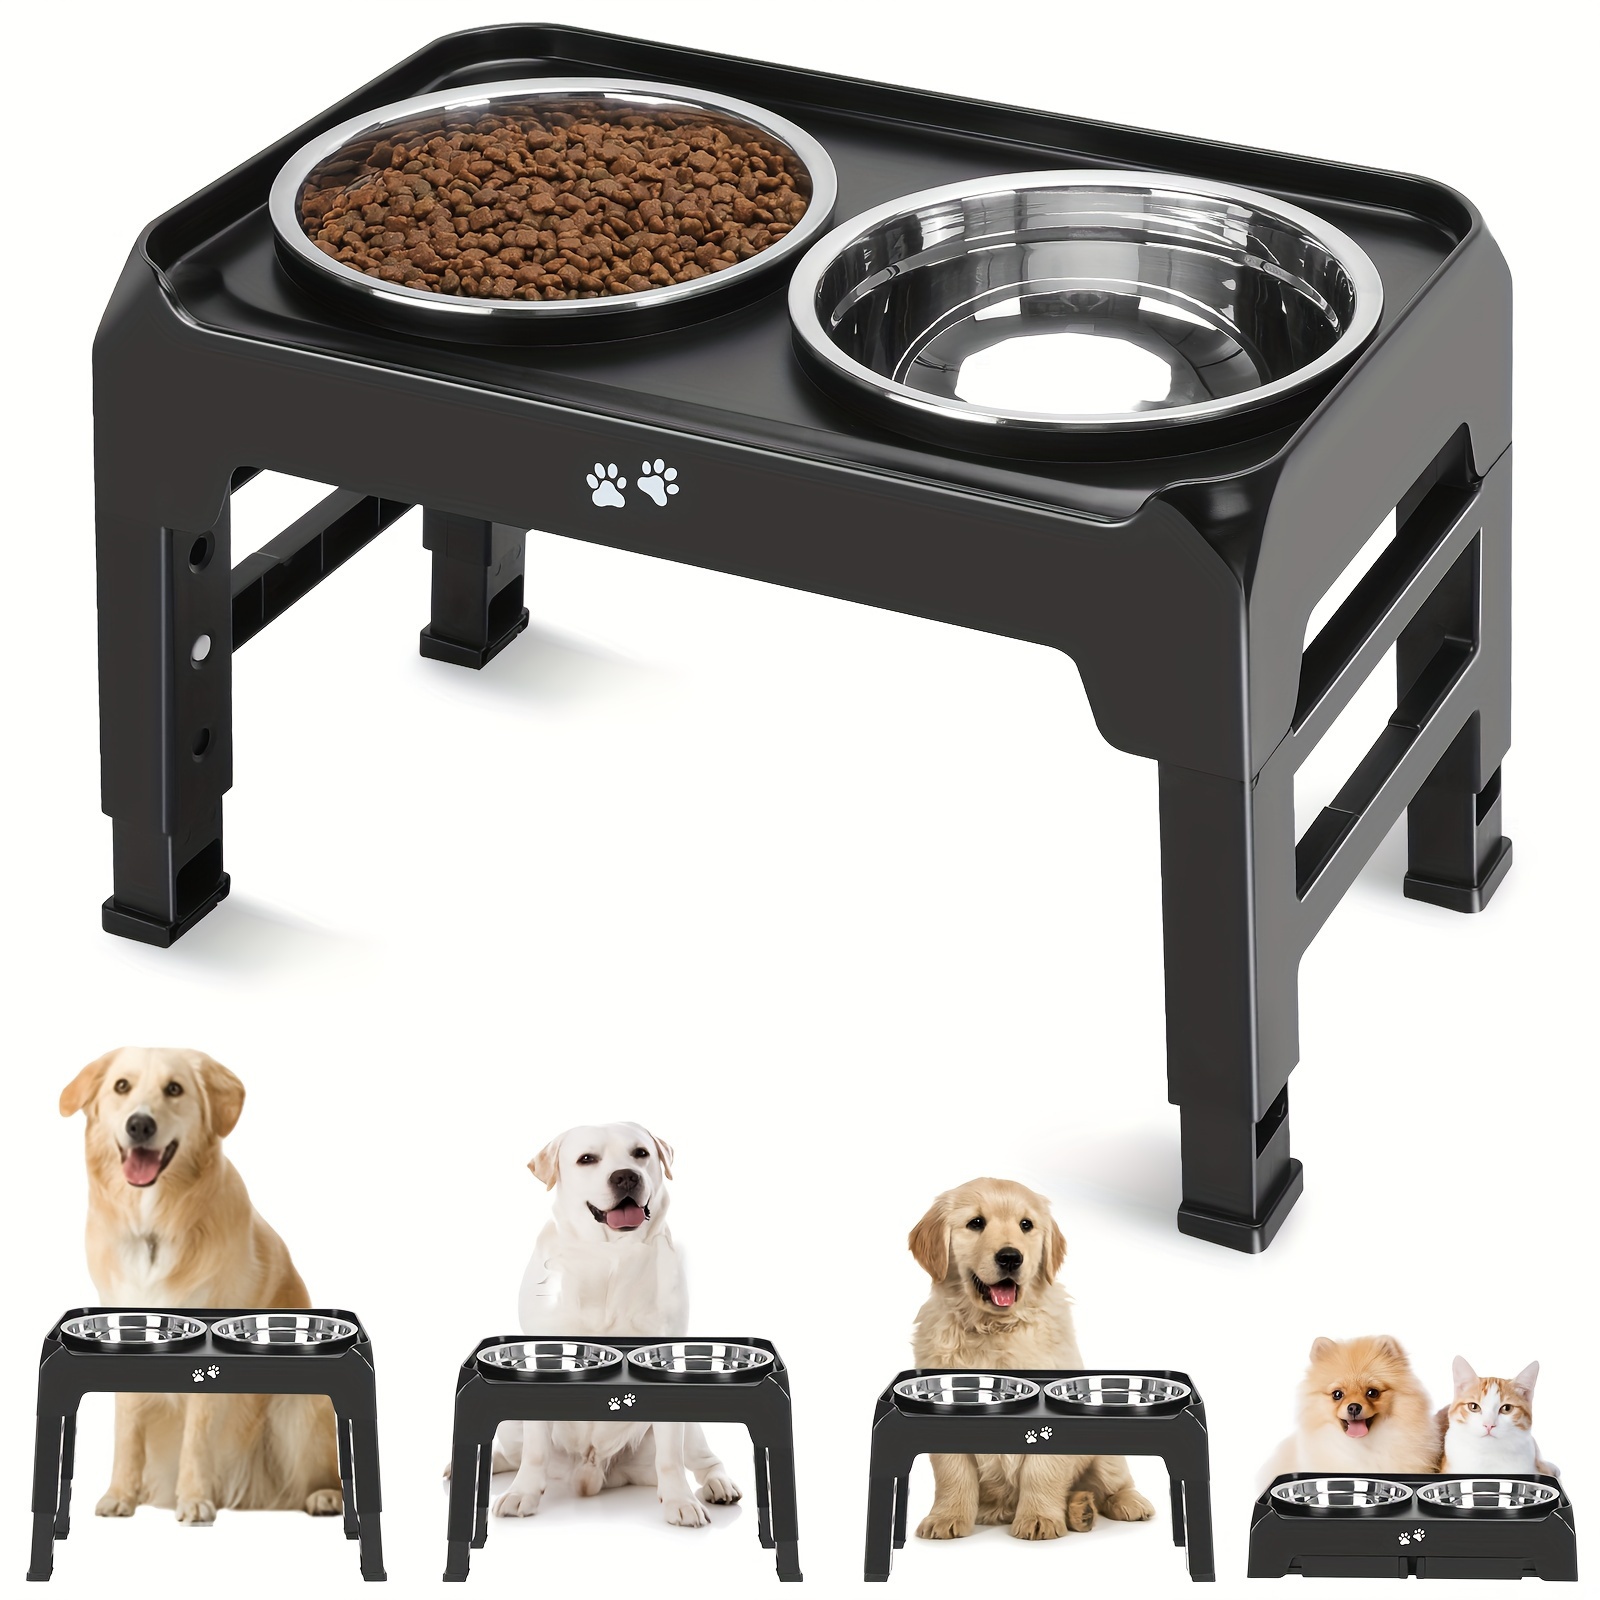 

Elevated Dog Feeder Table With Double Bowls, 4 Heights Adjustable Raised Dog Bowl Stand With 2pcs Stainless Steel Dog Food Bowl Water Bowl